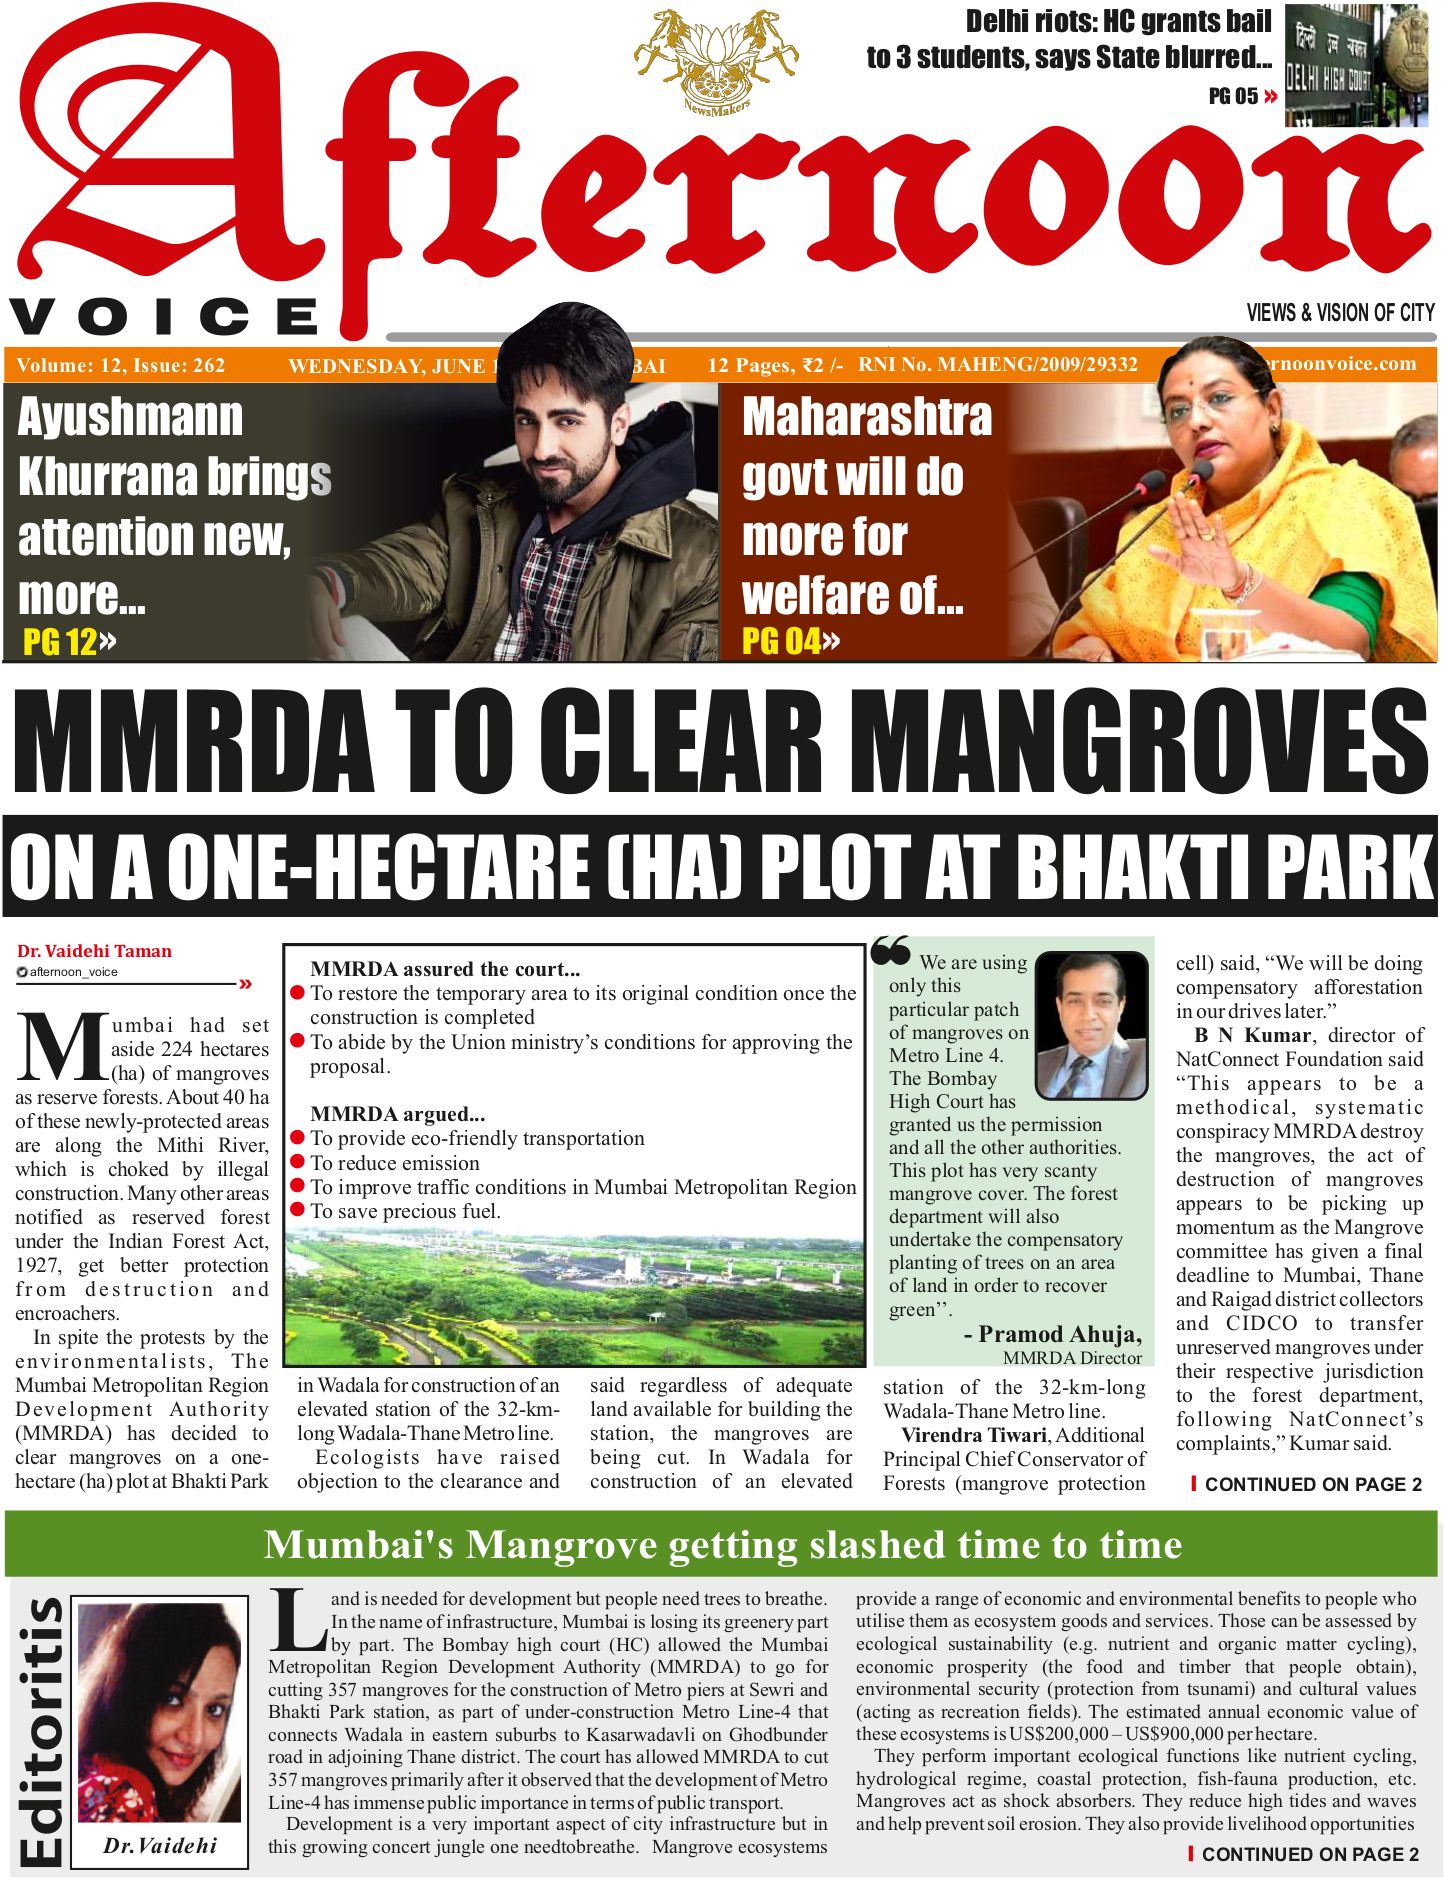 16 June 21 Page 1 Online English News Paper Daily News Epaper Today Newspaper